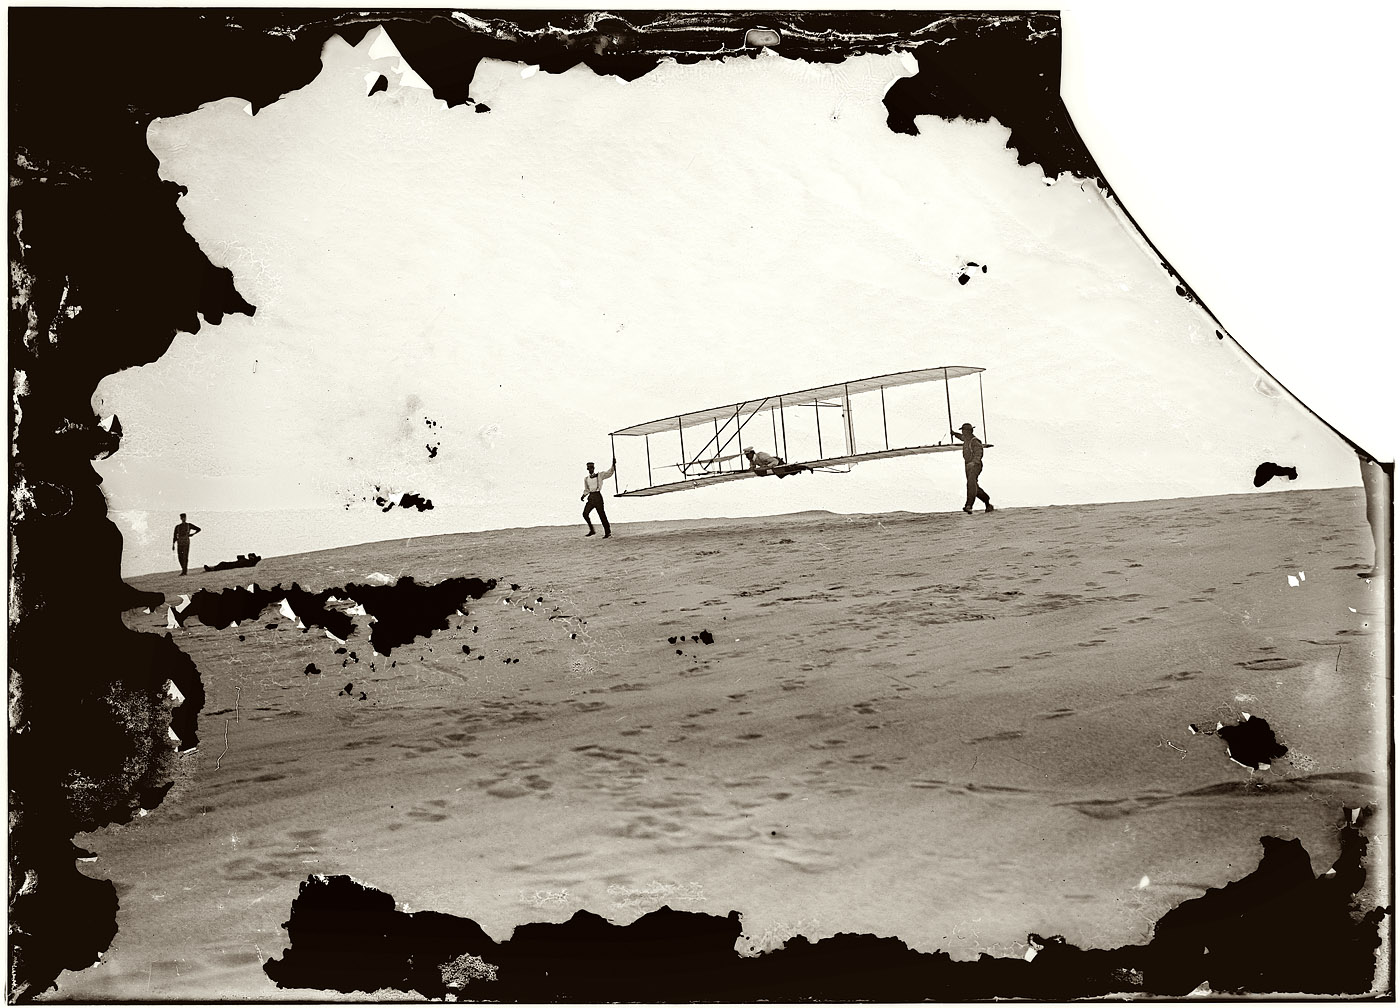 Kitty Hawk, North Carolina. "Start of a glide; Wilbur in motion at left holding one end of glider (rebuilt with single vertical rudder), Orville lying prone in machine, and Dan Tate at right." October 10, 1902. 5x7 dry-plate glass negative attributed to the Wright Brothers. View full size.